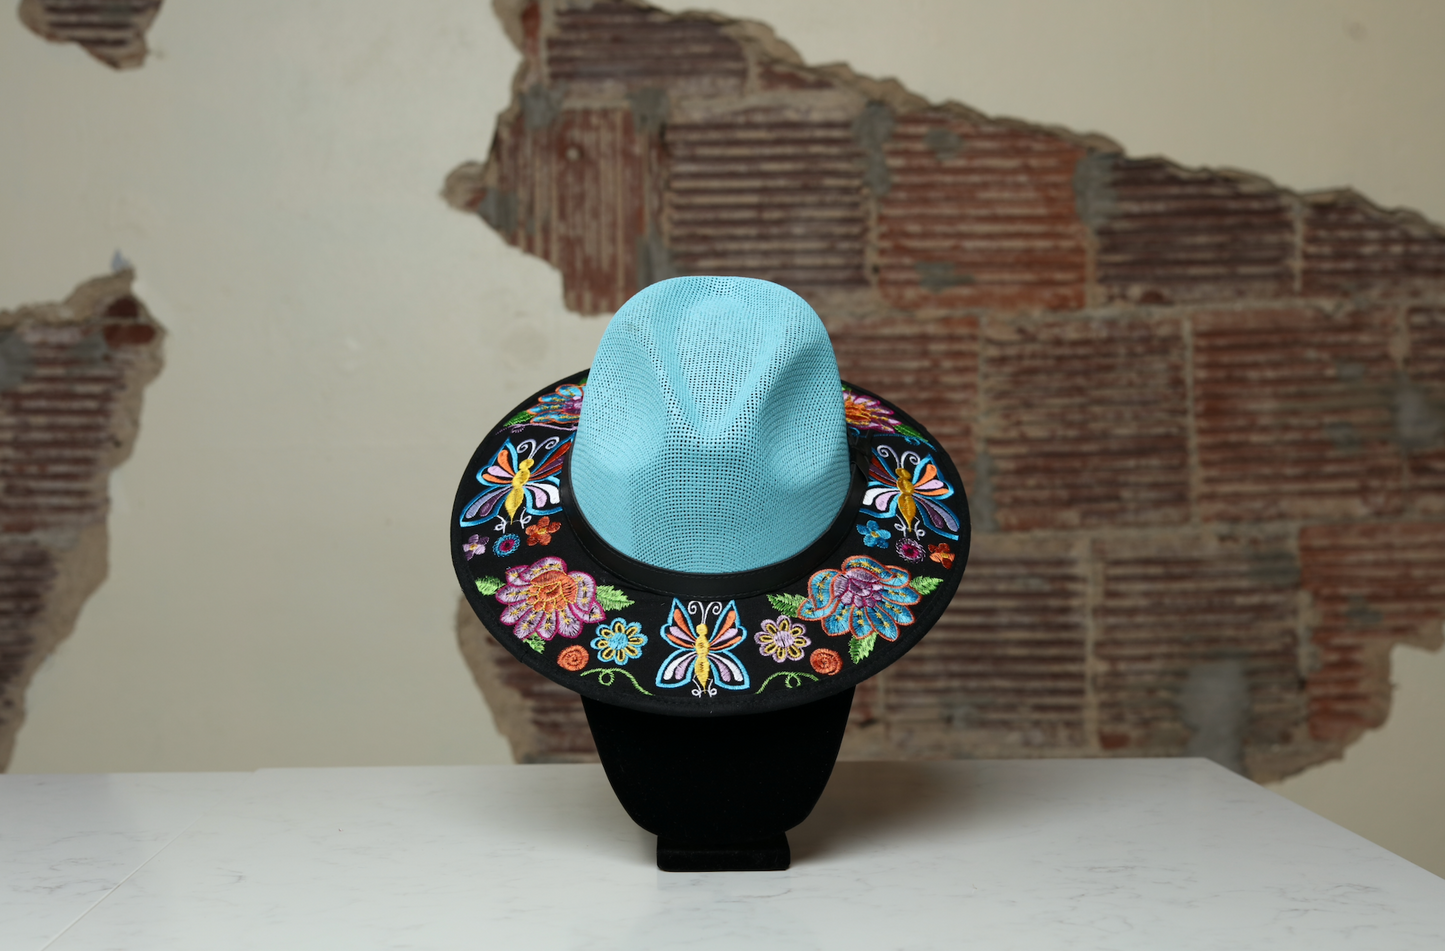 Hand embroidered blue brim hat, the perfect accessory to add fun and style to any outfit. With black, purple and blue flowers and butterflies as multicultural embellishments.